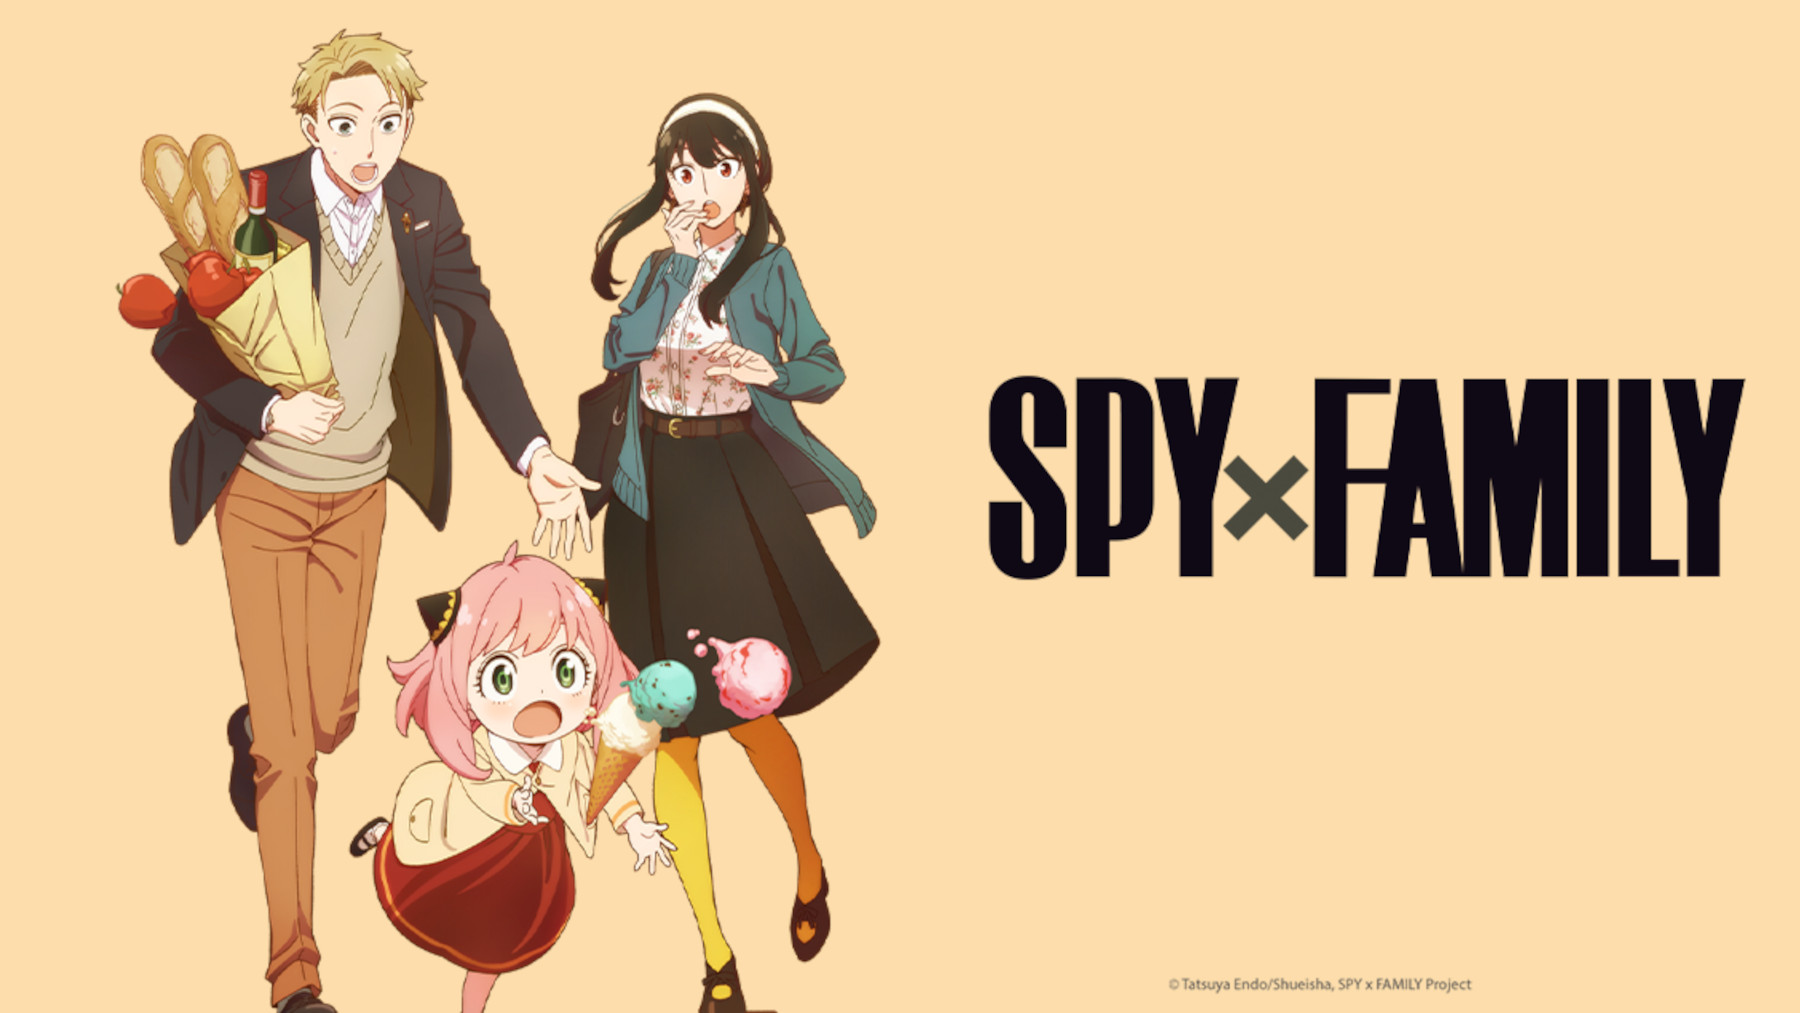 Spy x Family season 2 release schedule: All episodes release dates